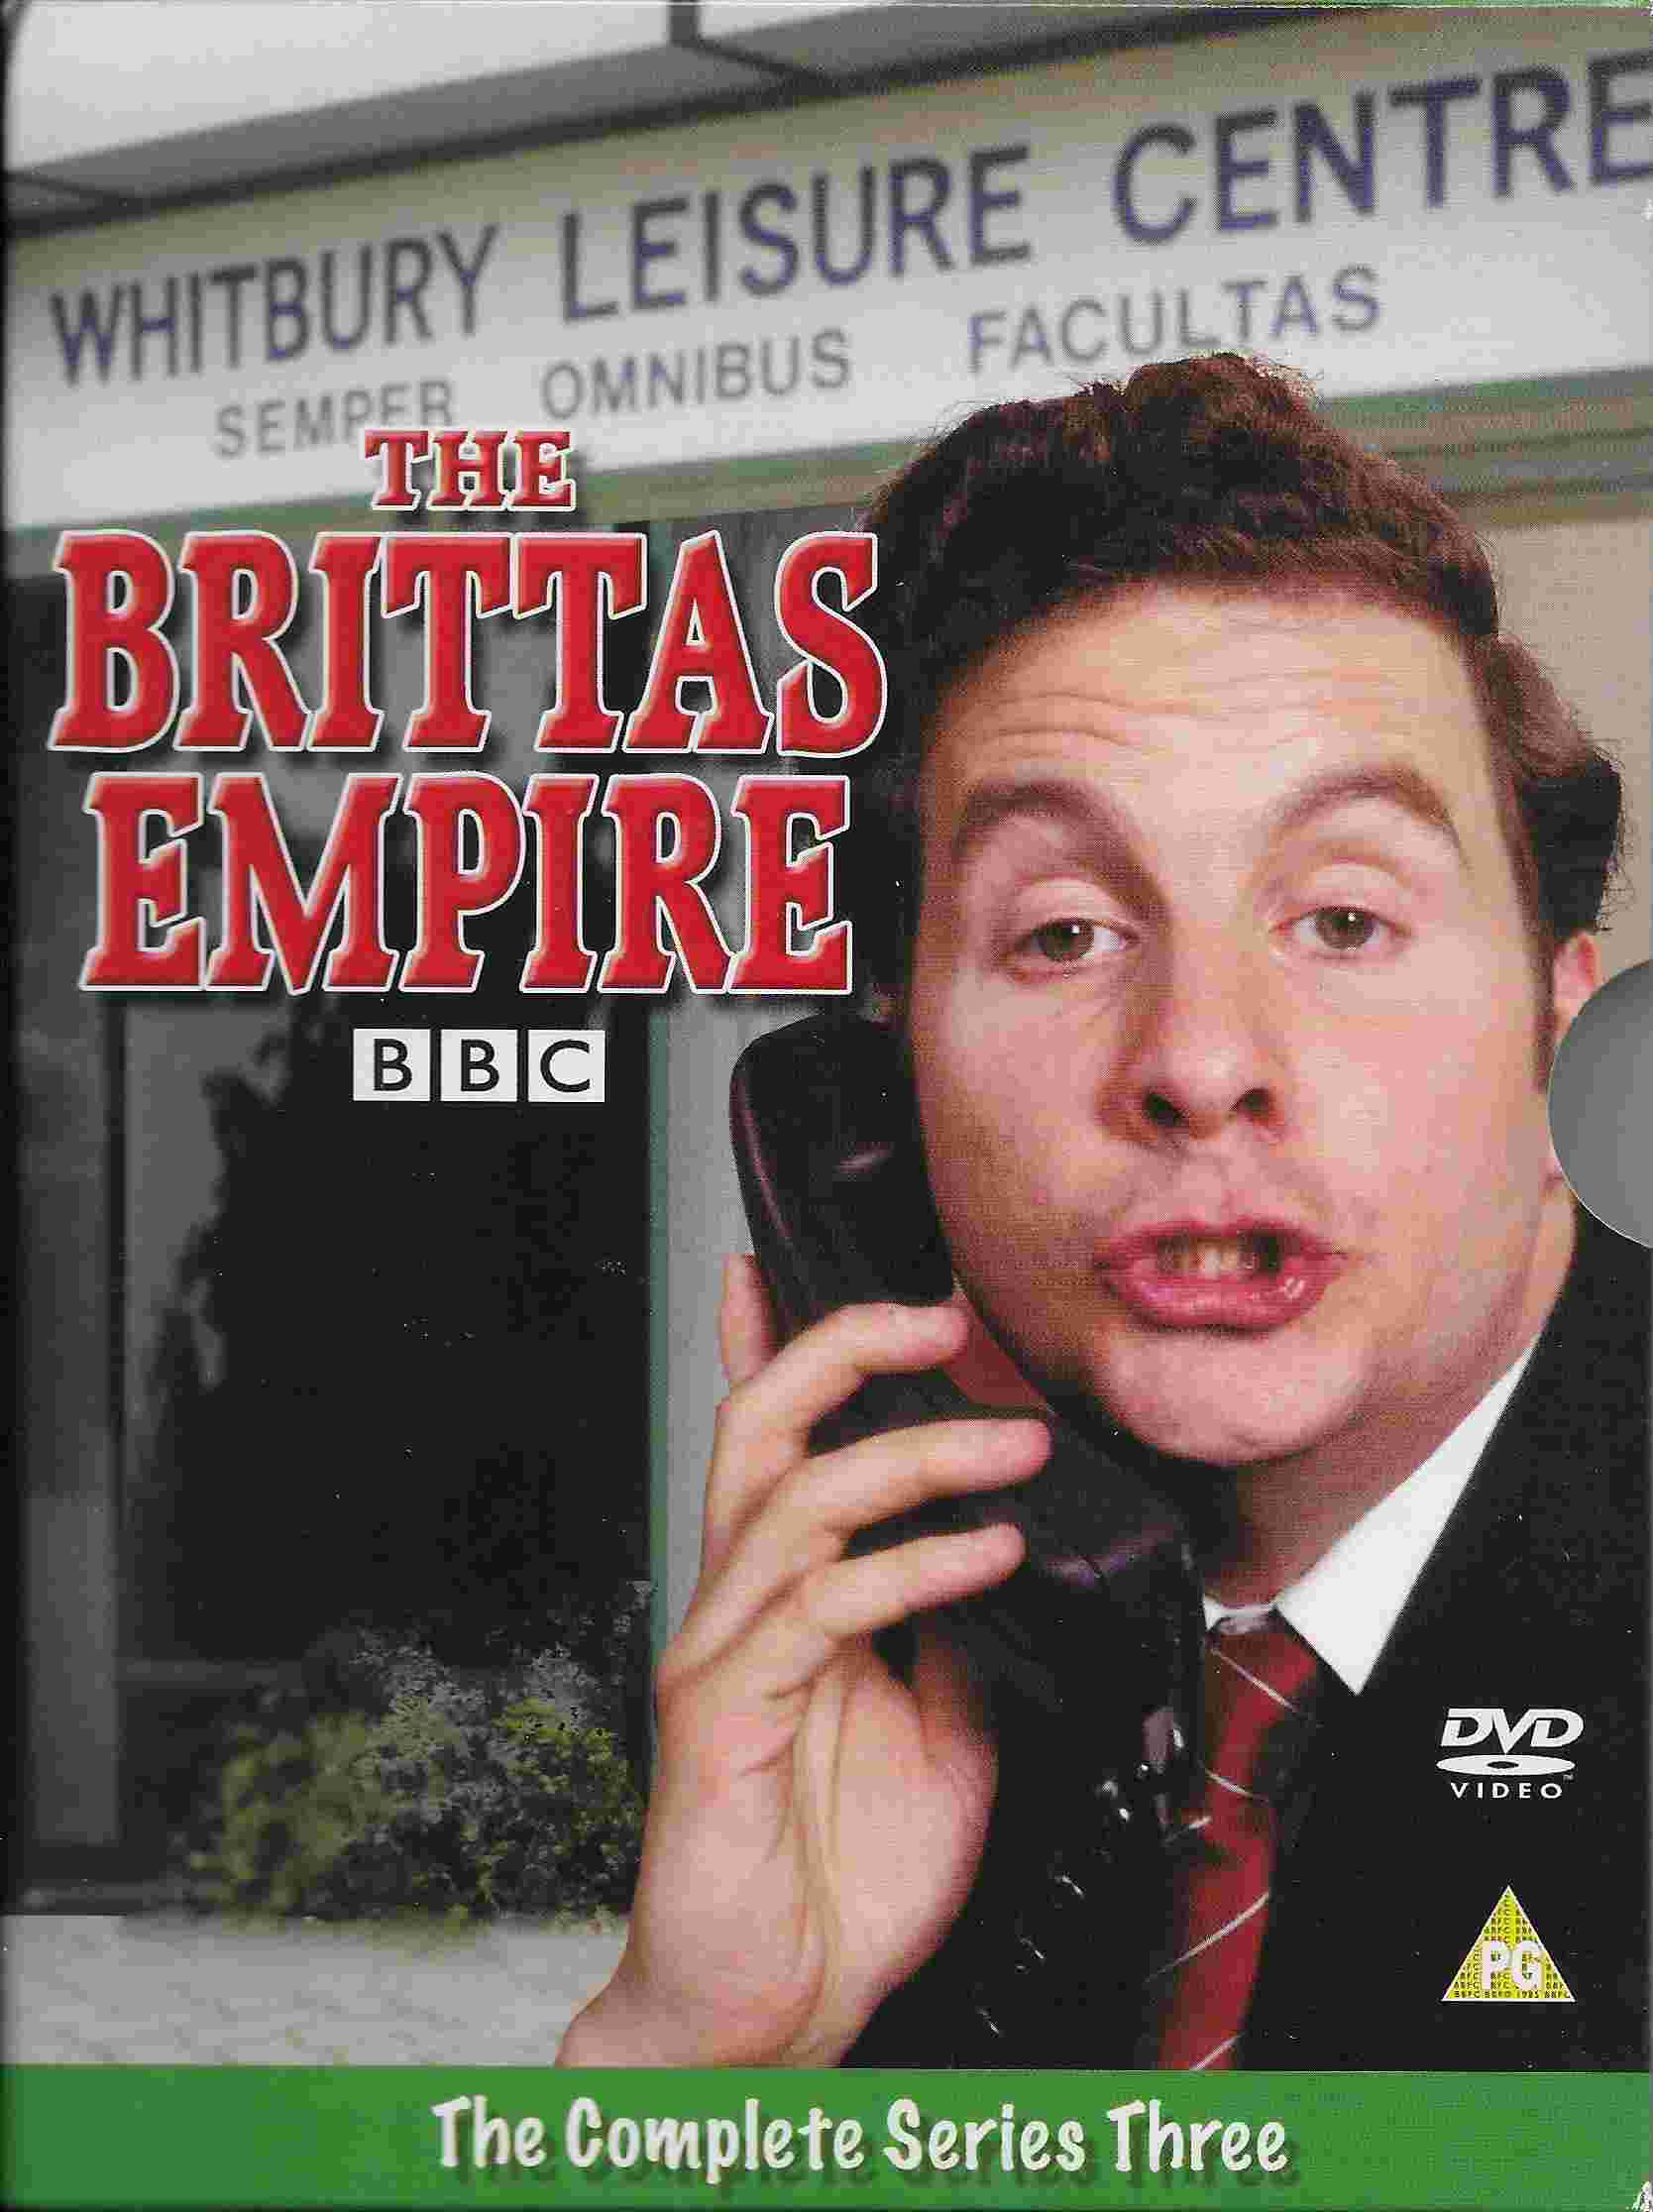 Picture of The Brittas empire - Series 3 by artist Richard Fegen / Andrew Norriss from the BBC dvds - Records and Tapes library